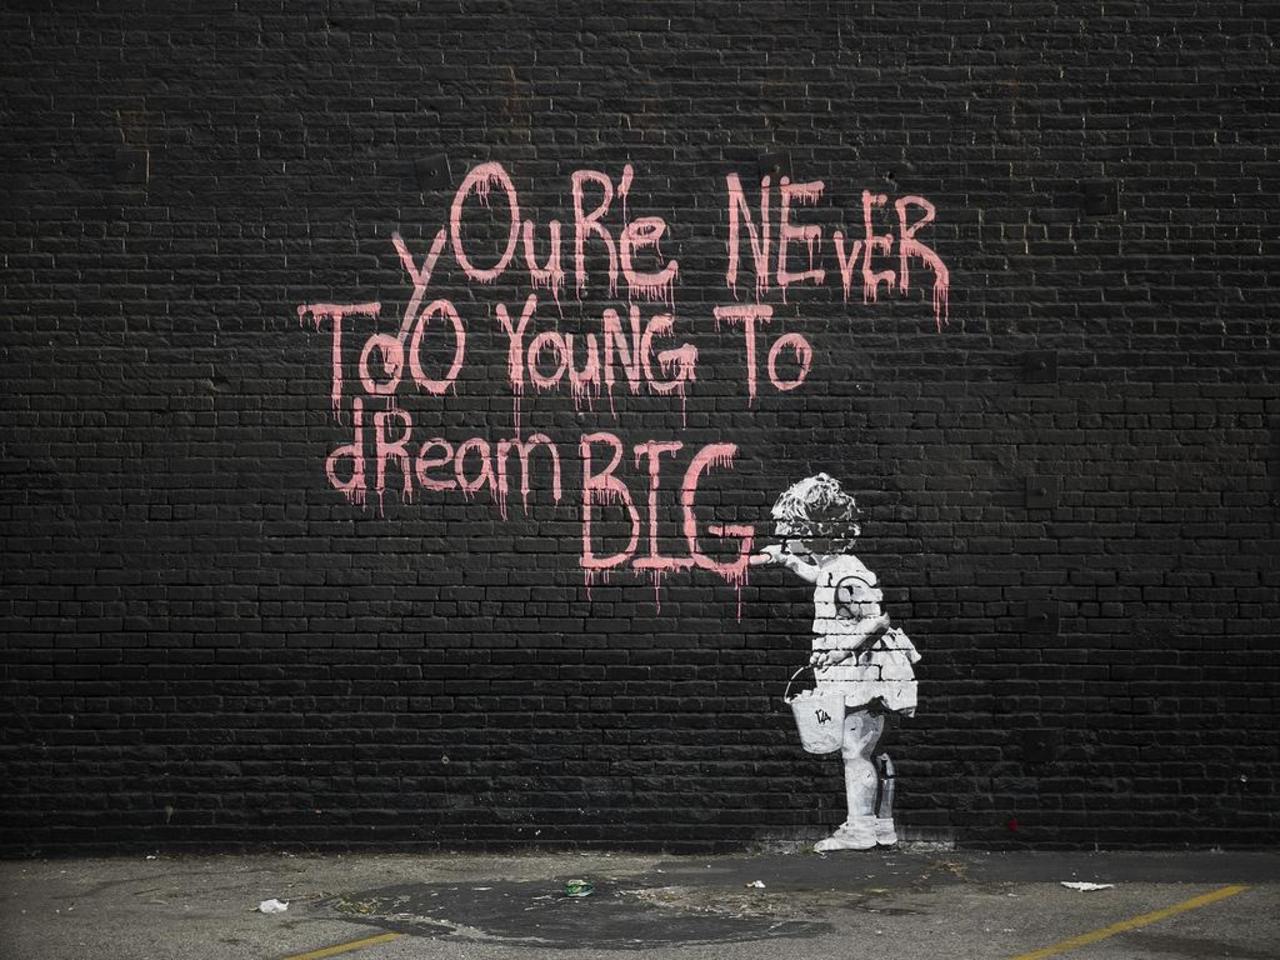 #Streetart #urbanart #graffiti #mural "You're  never too young to dream big !" by #artist Banksy http://t.co/NwG94rhoh1